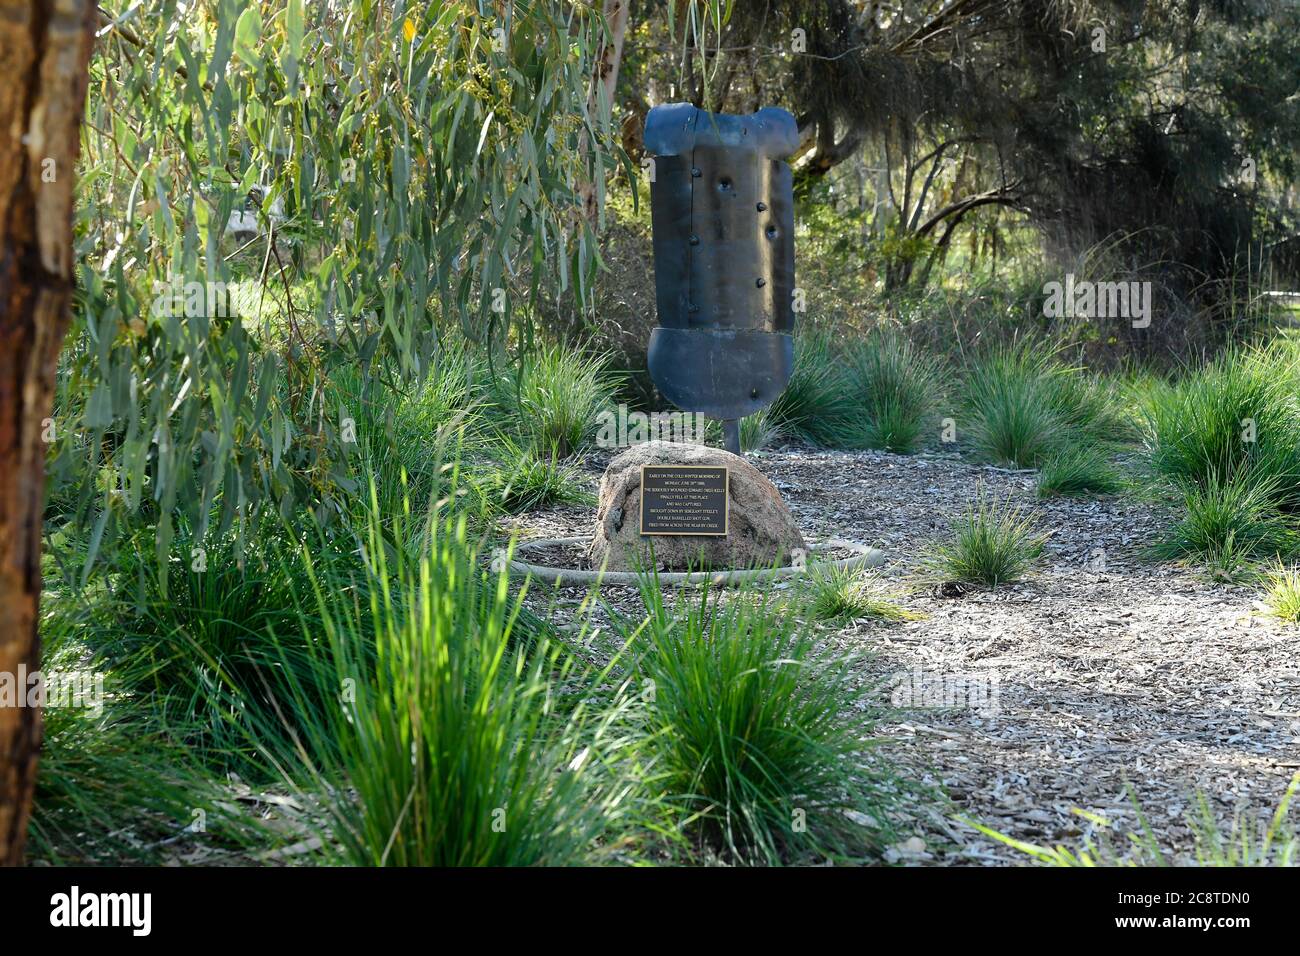 Glenrowan, Victoria. A stone plinth with brass plaque and a replica of Ned Kelly's armour marks the spot where the famous Australian outlaw bushranger Stock Photo